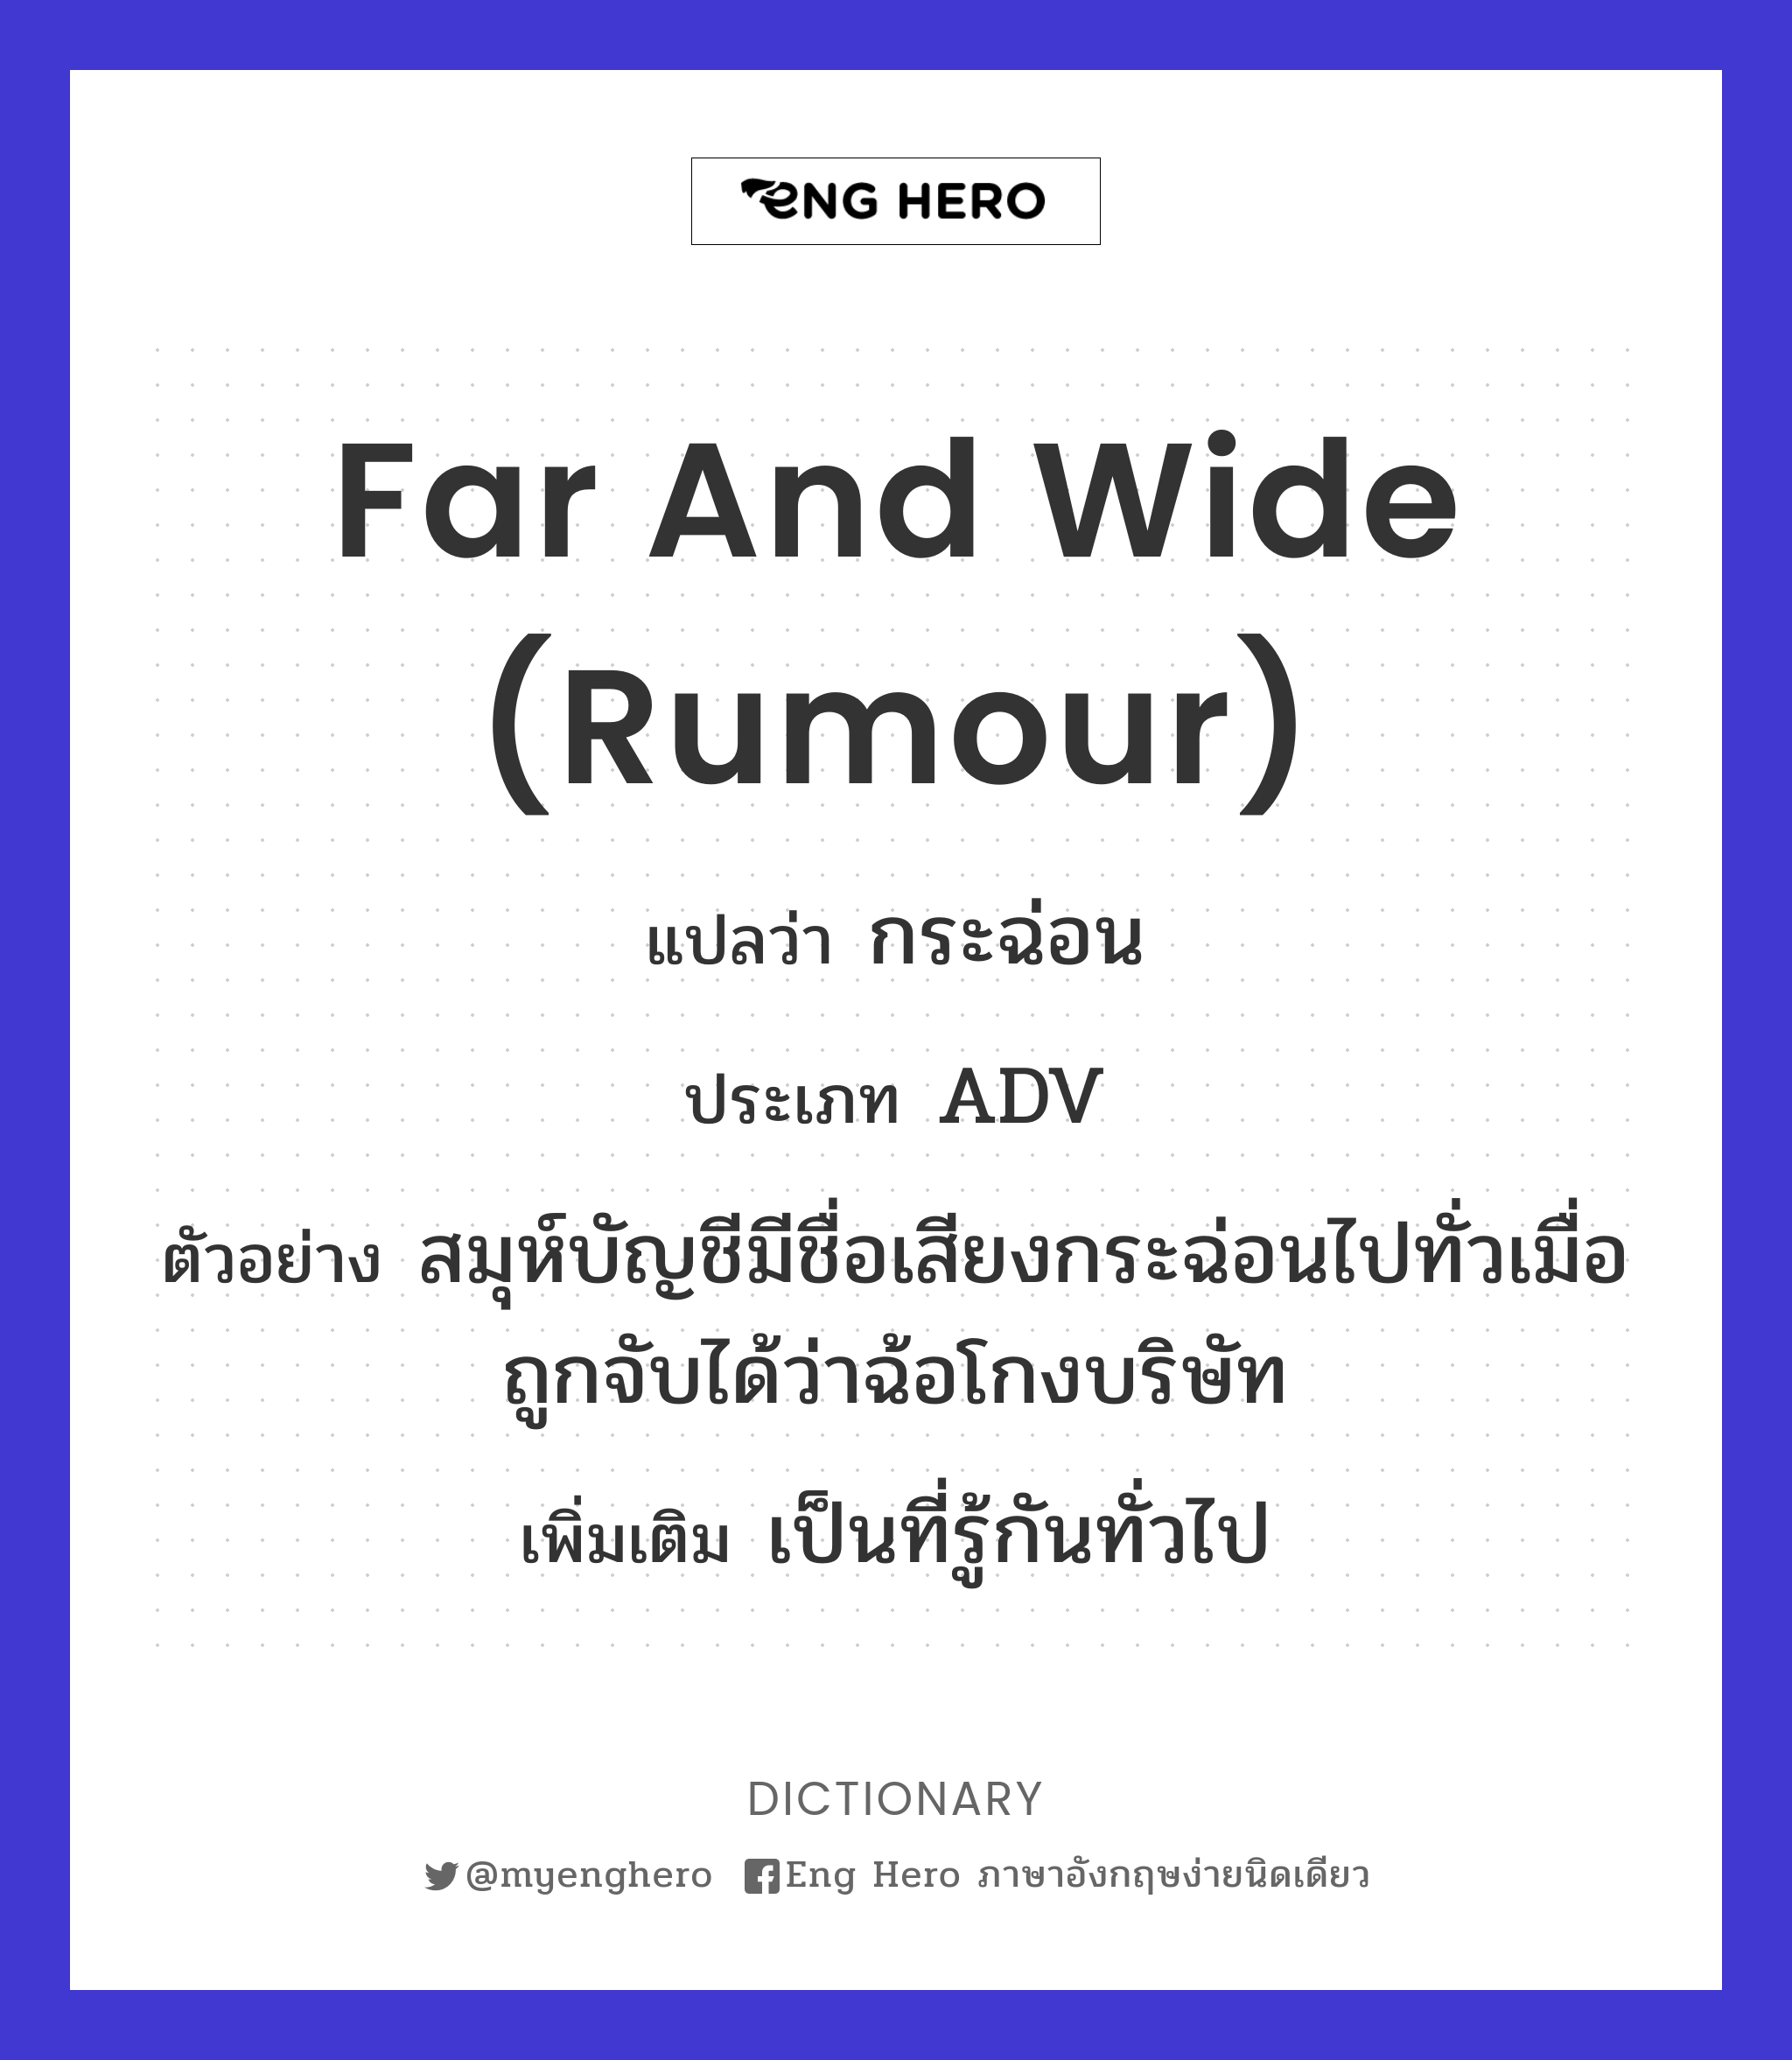 far and wide (rumour)